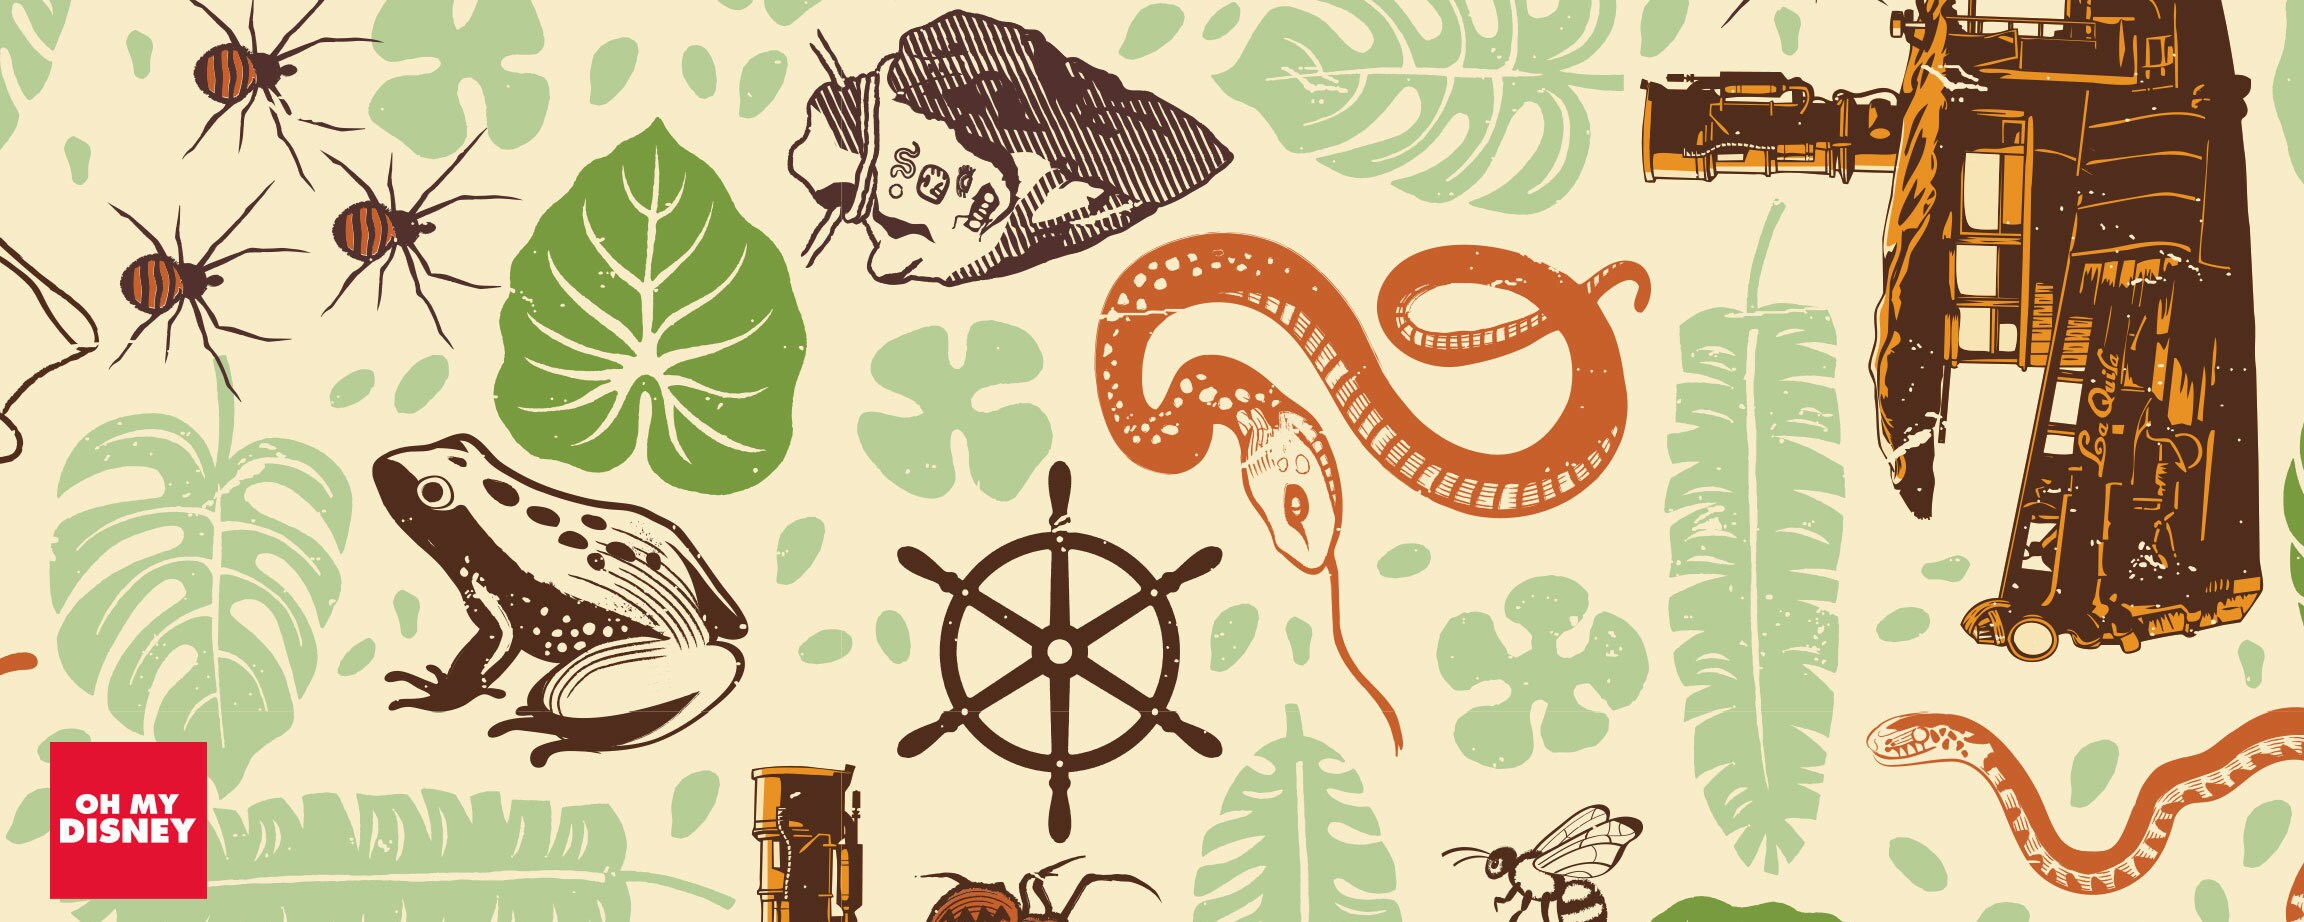 Let Your Taste For Adventure Soar With Mobile Wallpapers Inspired By Disney’s Jungle Cruise